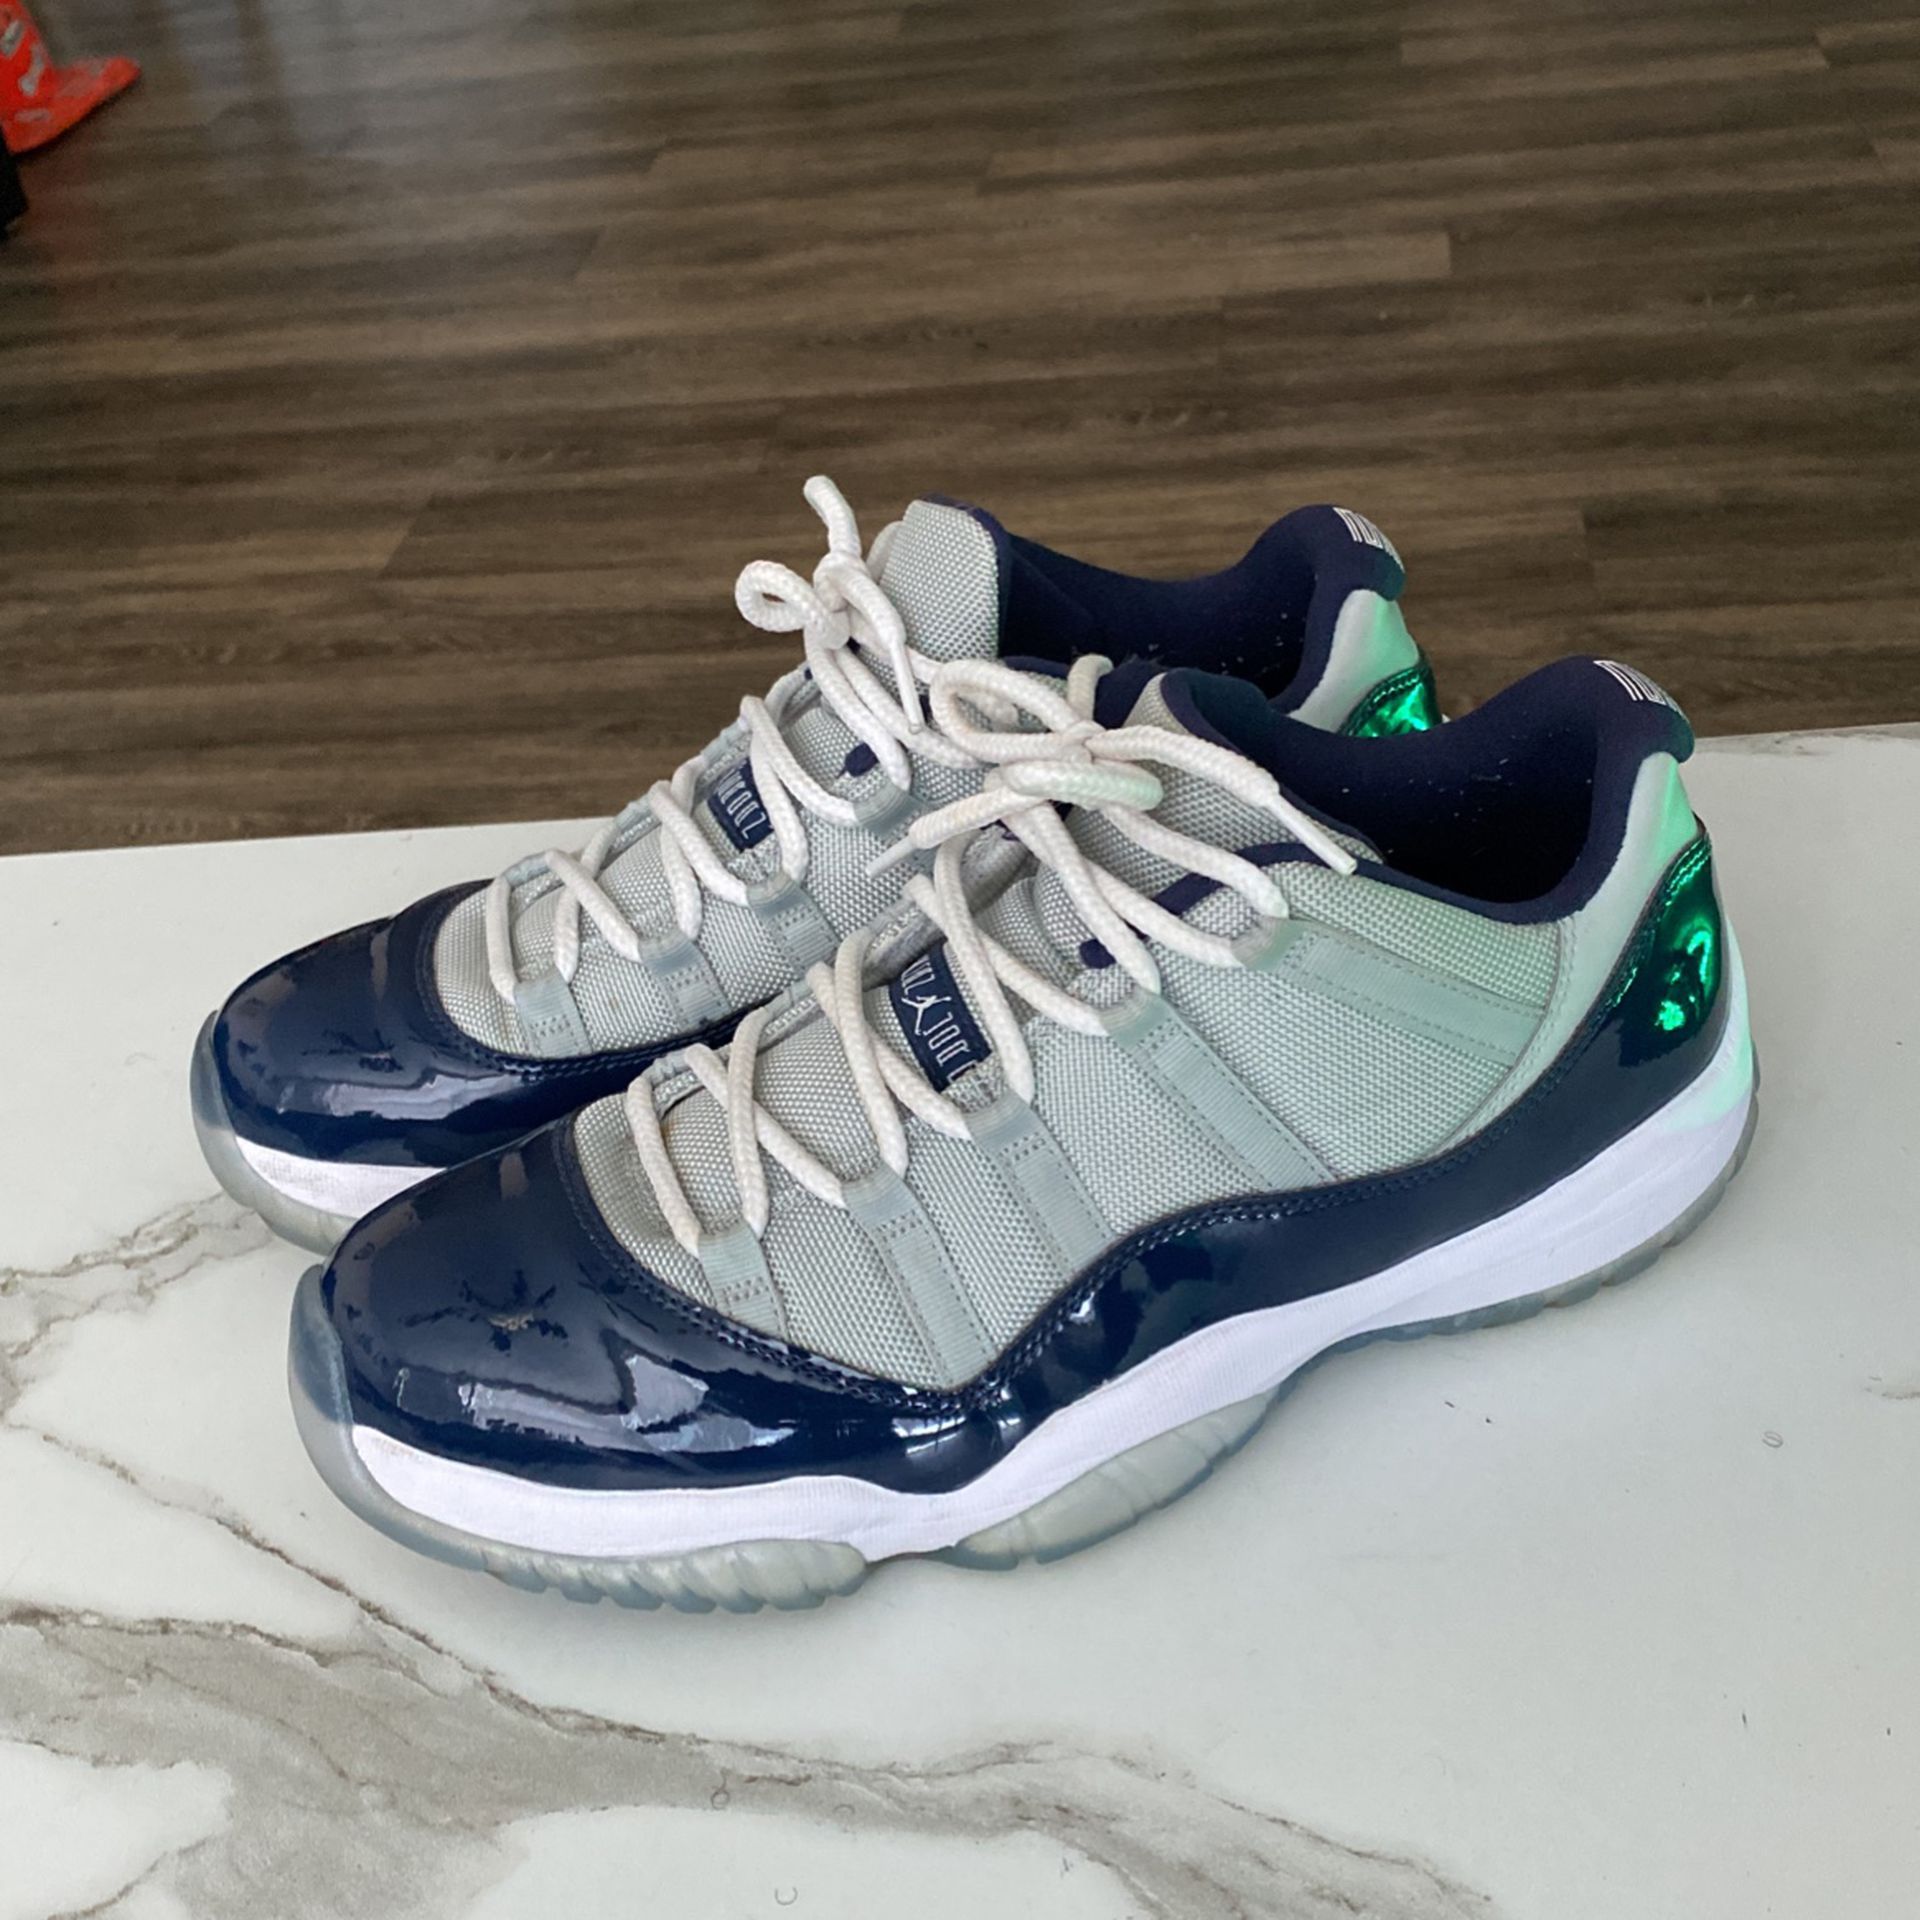 Georgetown 11 Low Size 11.5